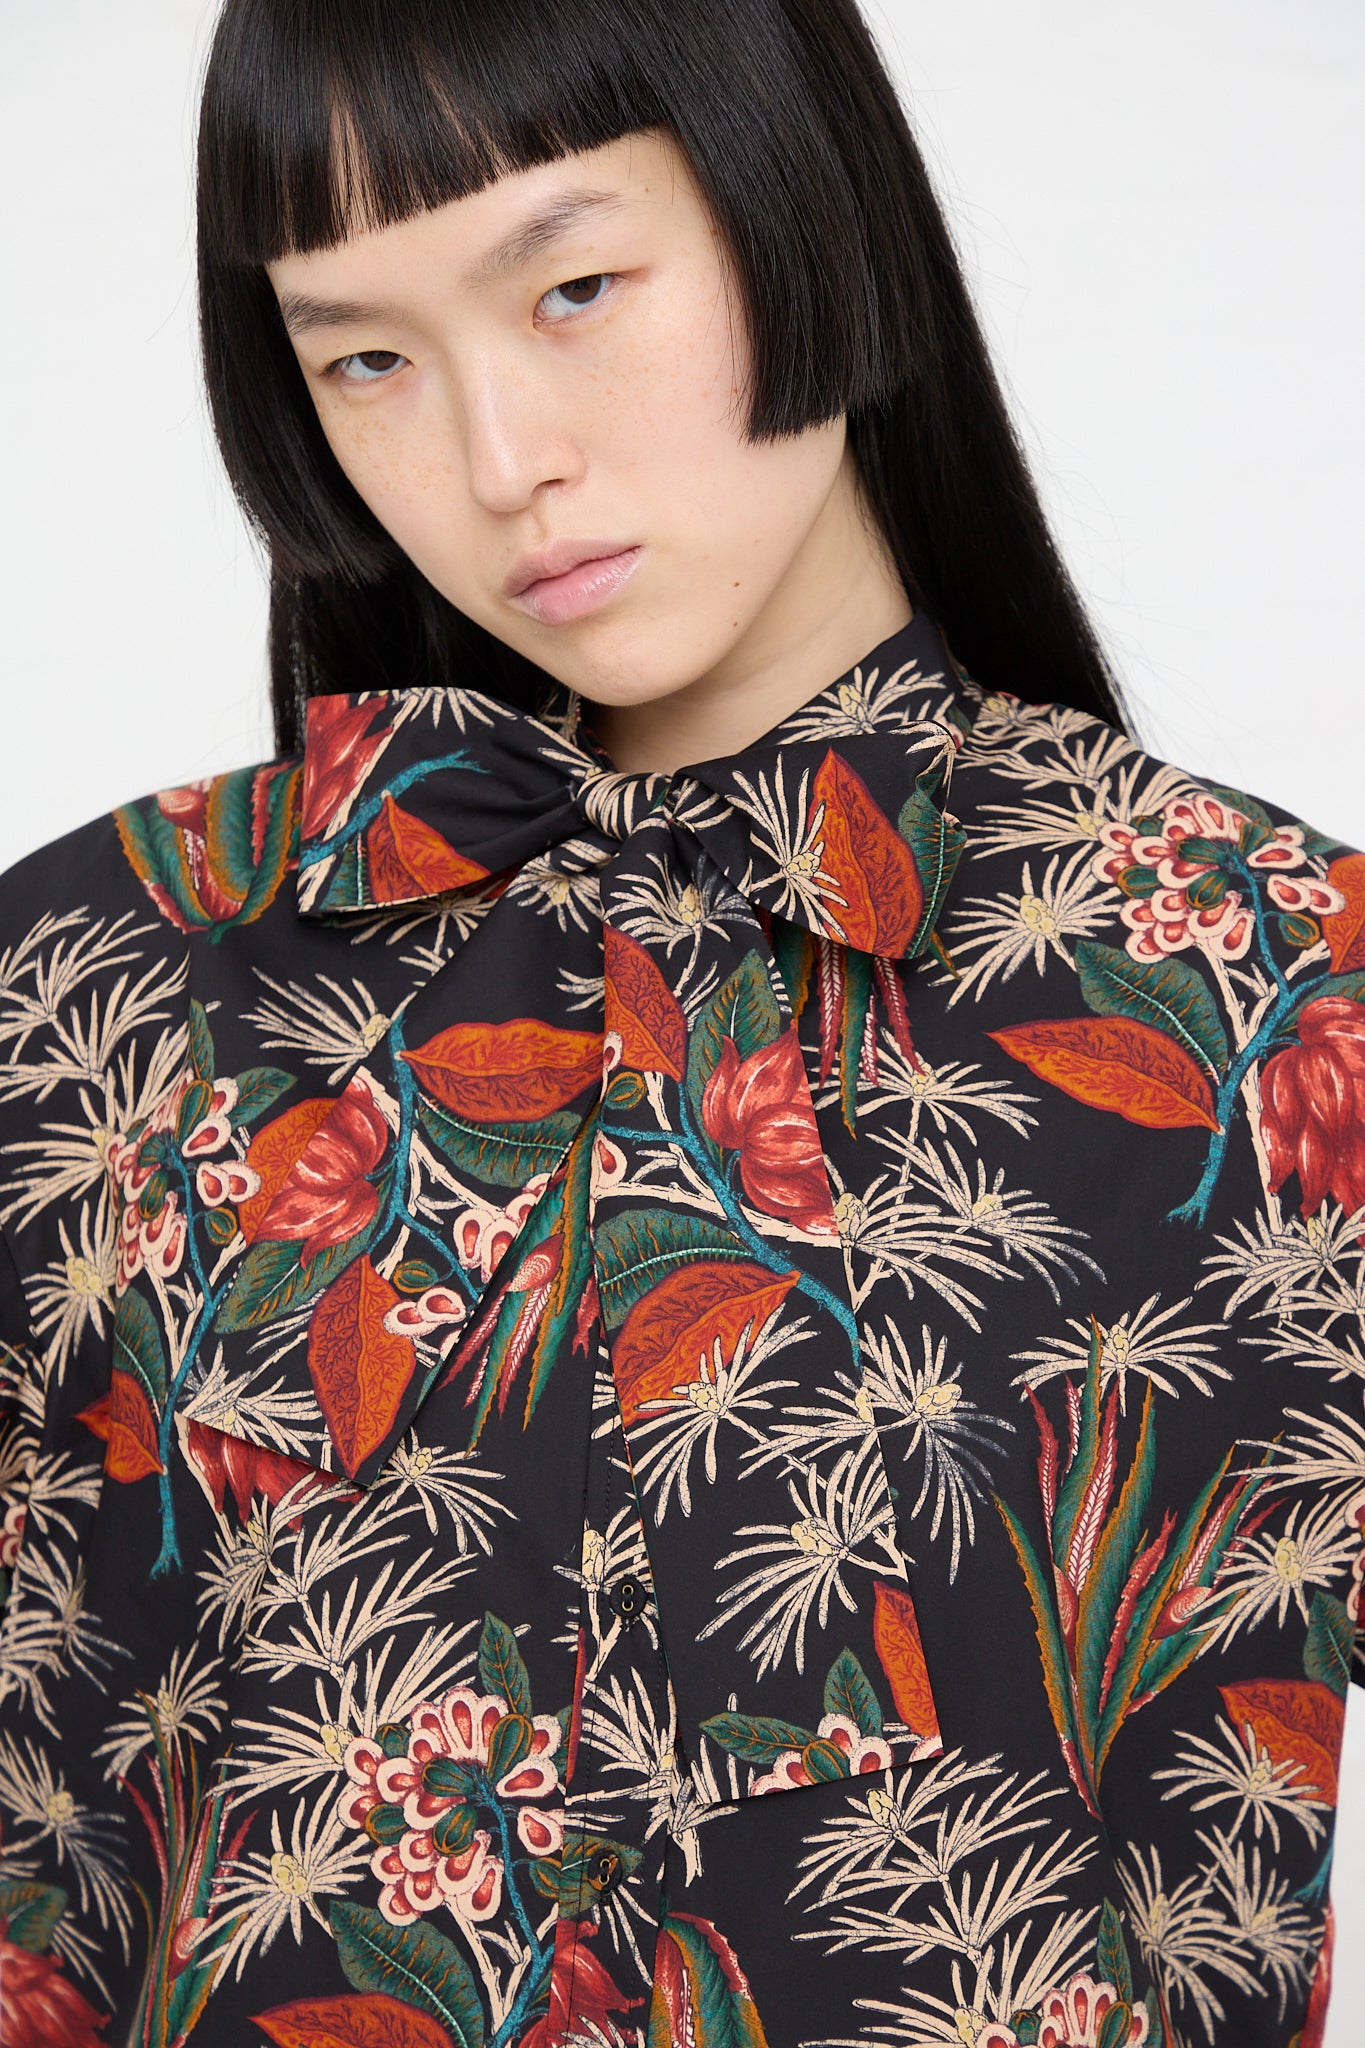 A model wearing an Ulla Johnson Alberta Blouse in Anthurium with a floral print. Front and up close view.